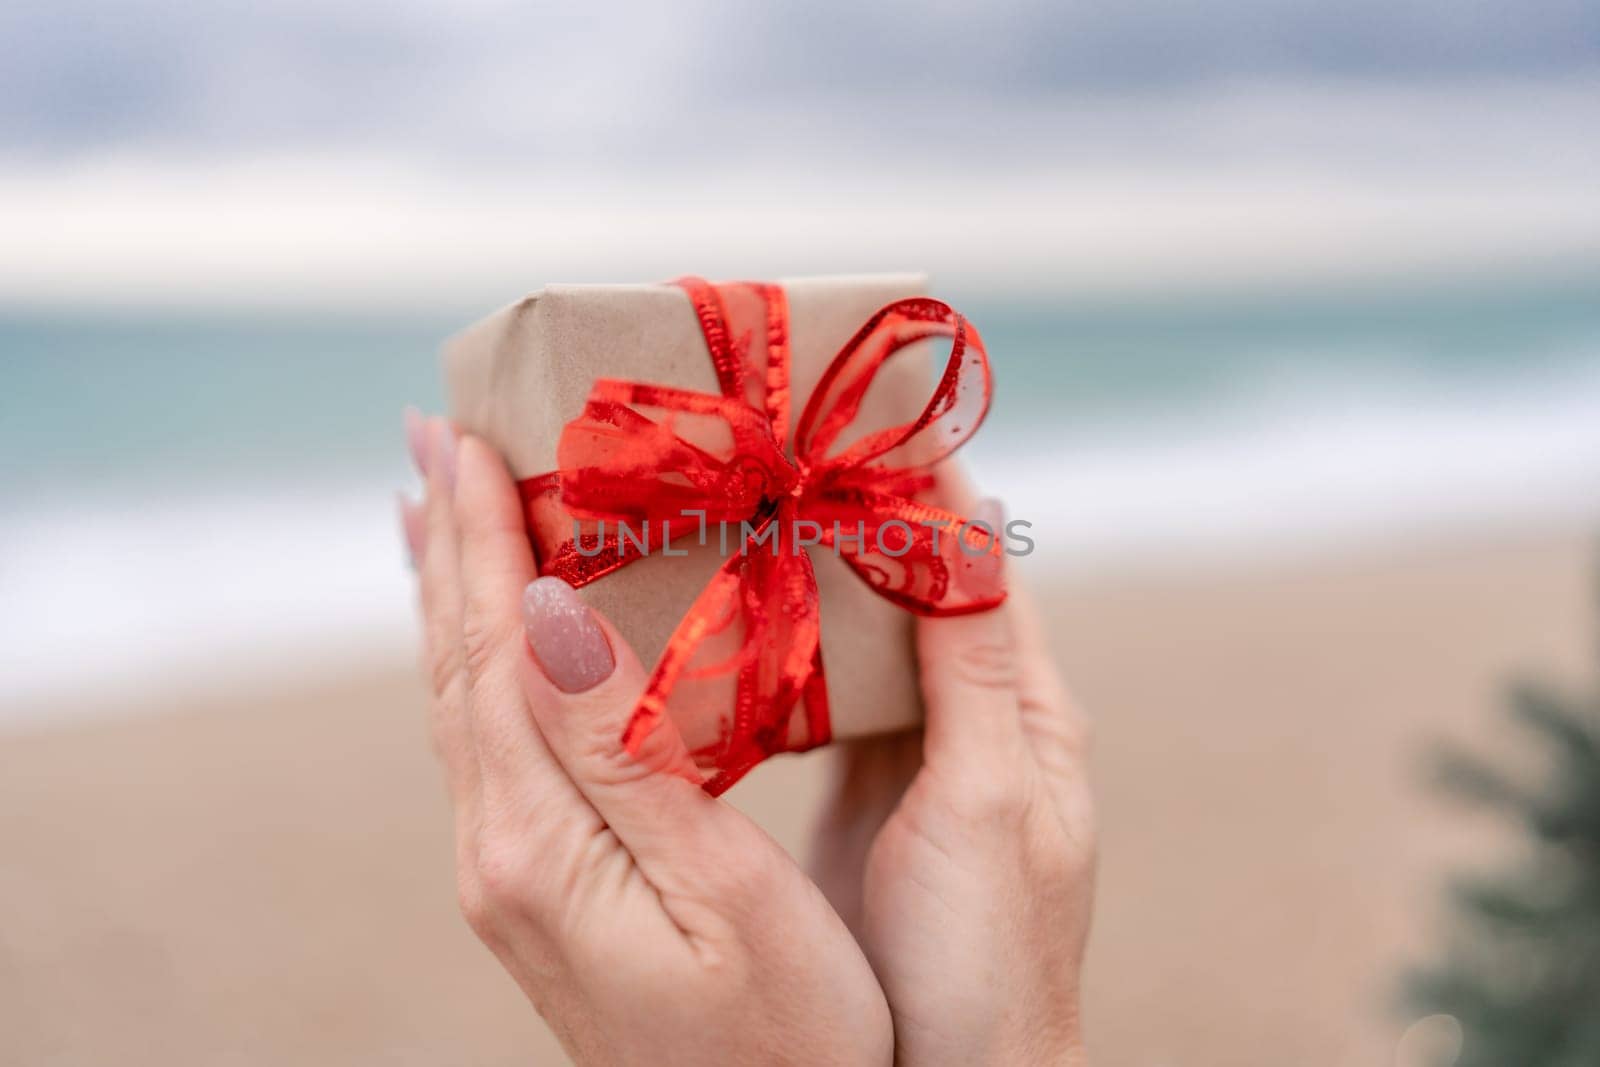 Hand holding wrapped gift with red bow. Sea Beach backdrop. The hand holding the gift is the main focus of the image, emphasizing the act of giving and receiving